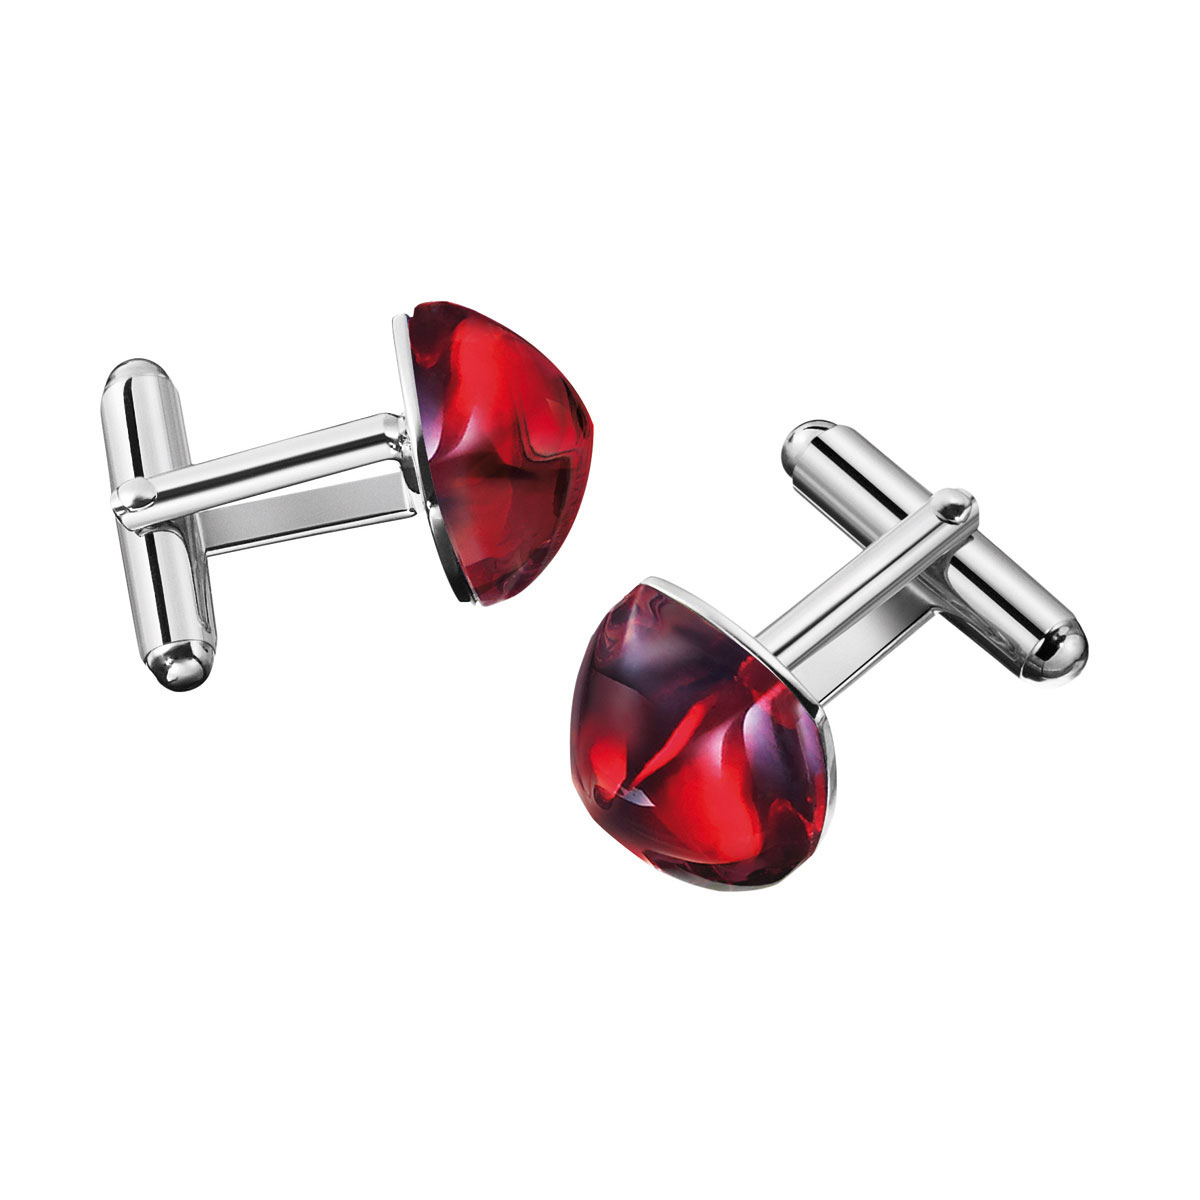 Baccarat Medicis Cufflinks Sterling Silver, Red